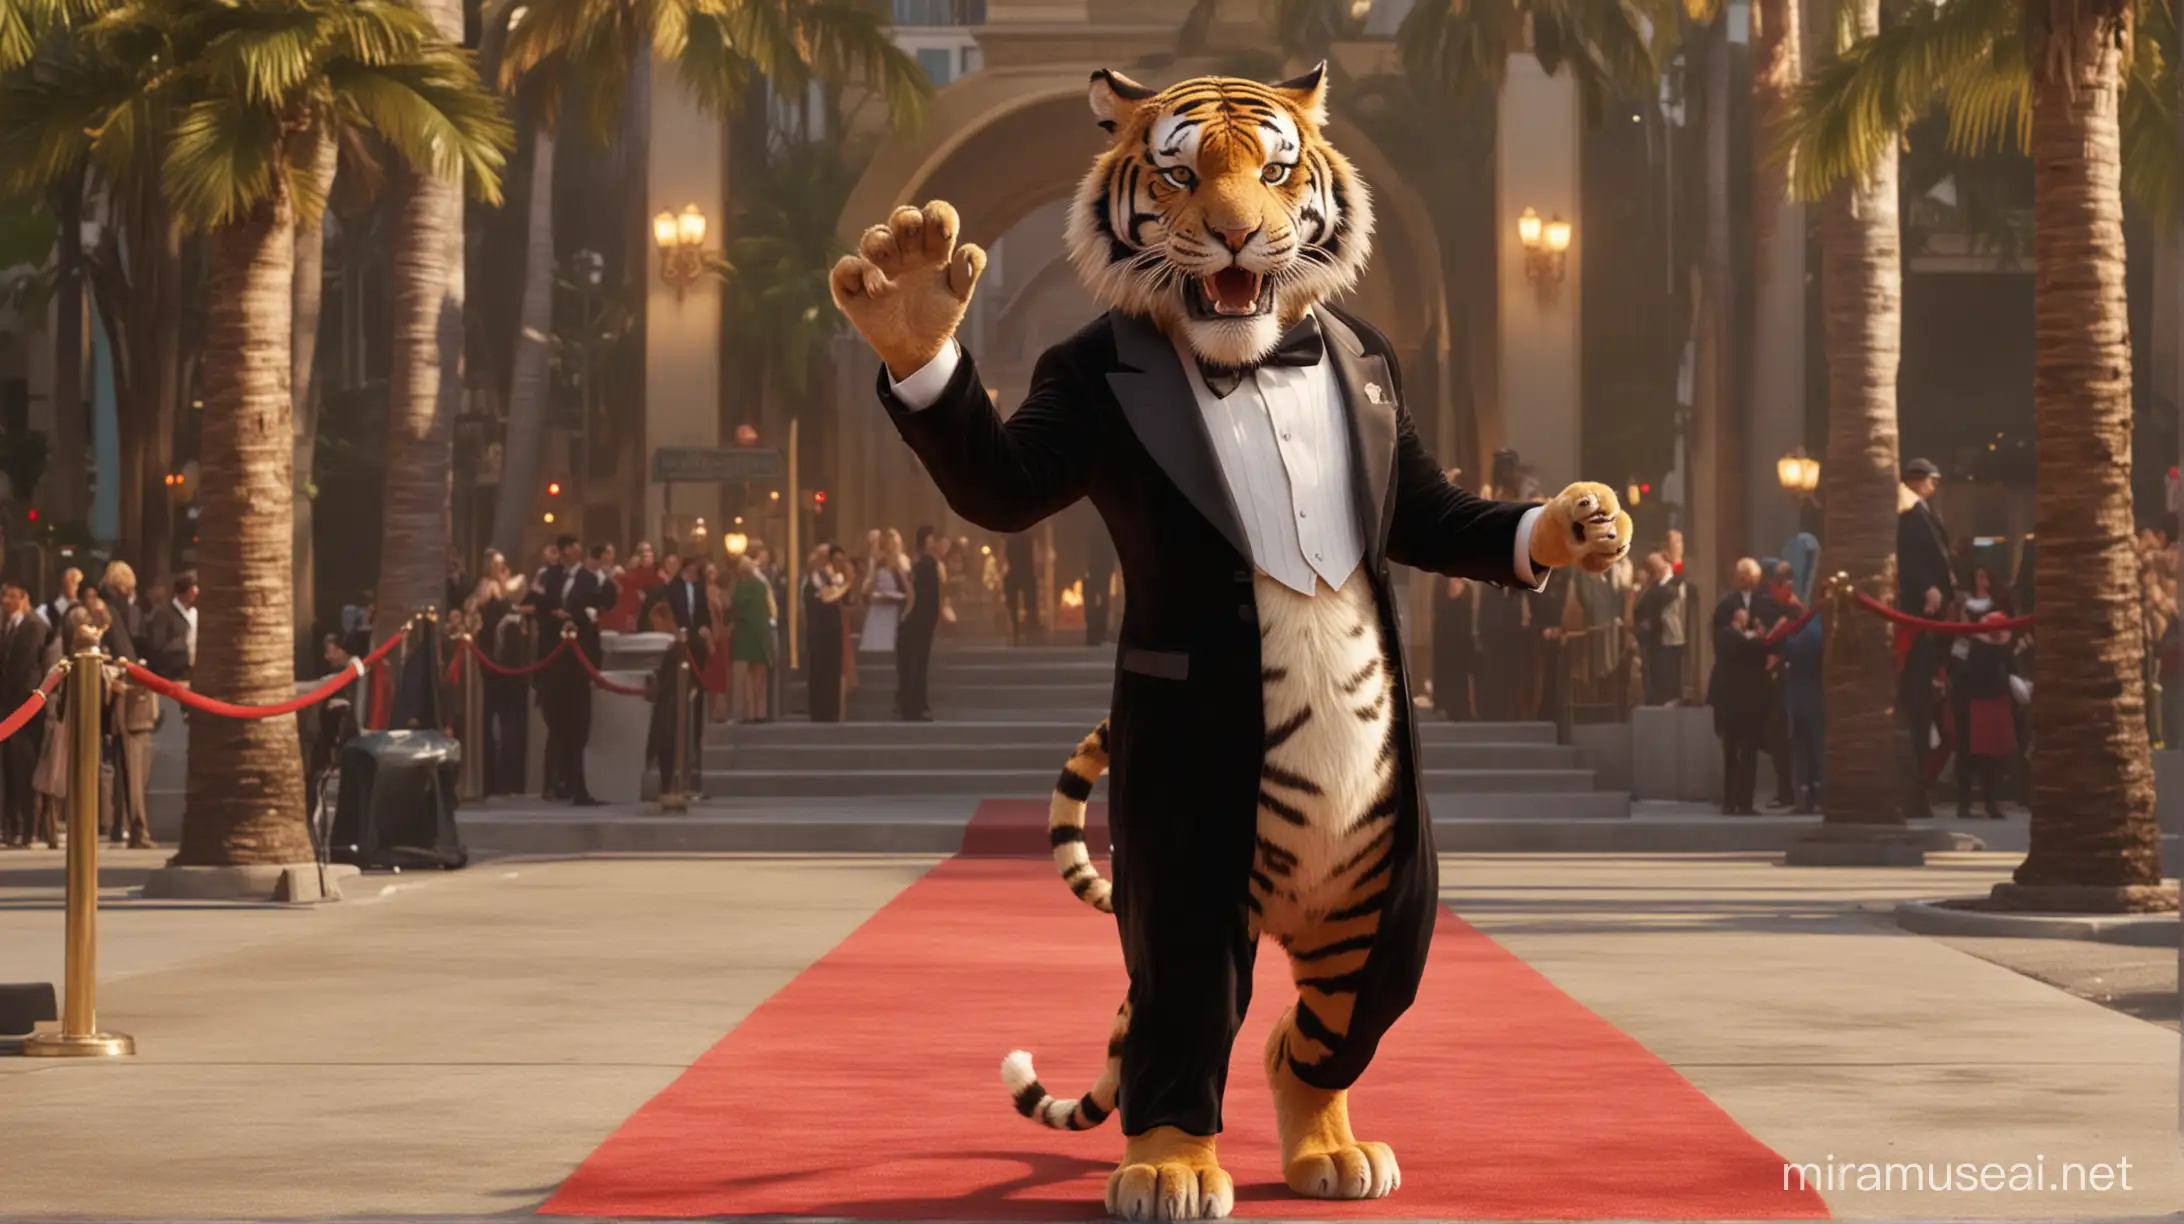 Slimmed Down Tiger in Hollywood Red Carpet Glamour